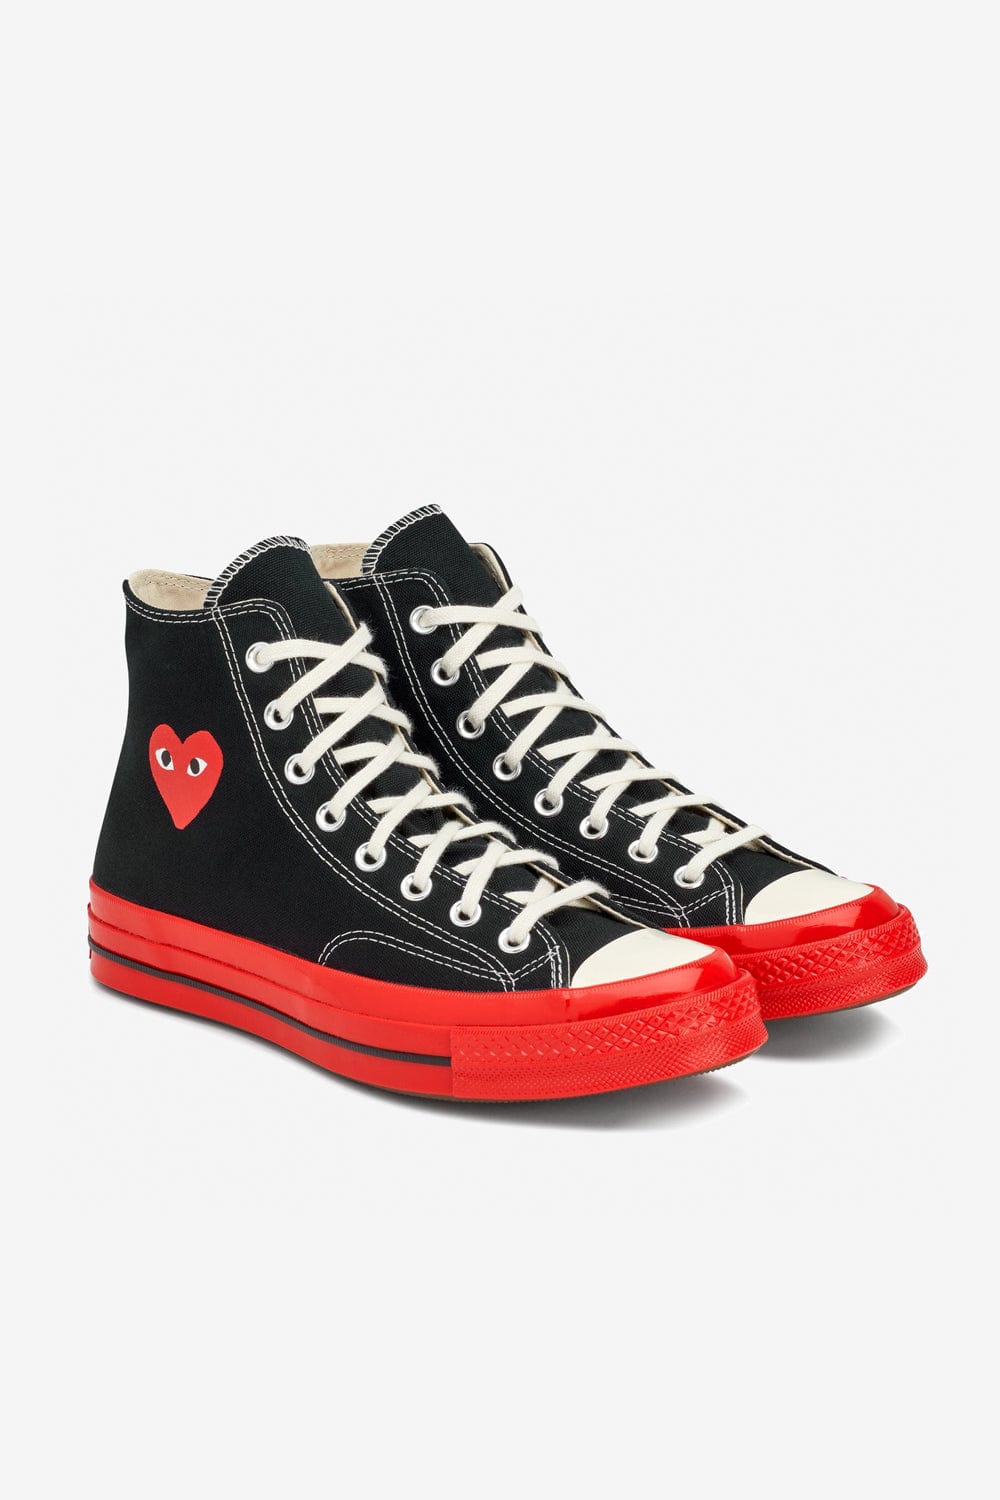 COMME PLAY Converse Chuck Taylor All Star '70 Hi Red Sole - Commonwealth